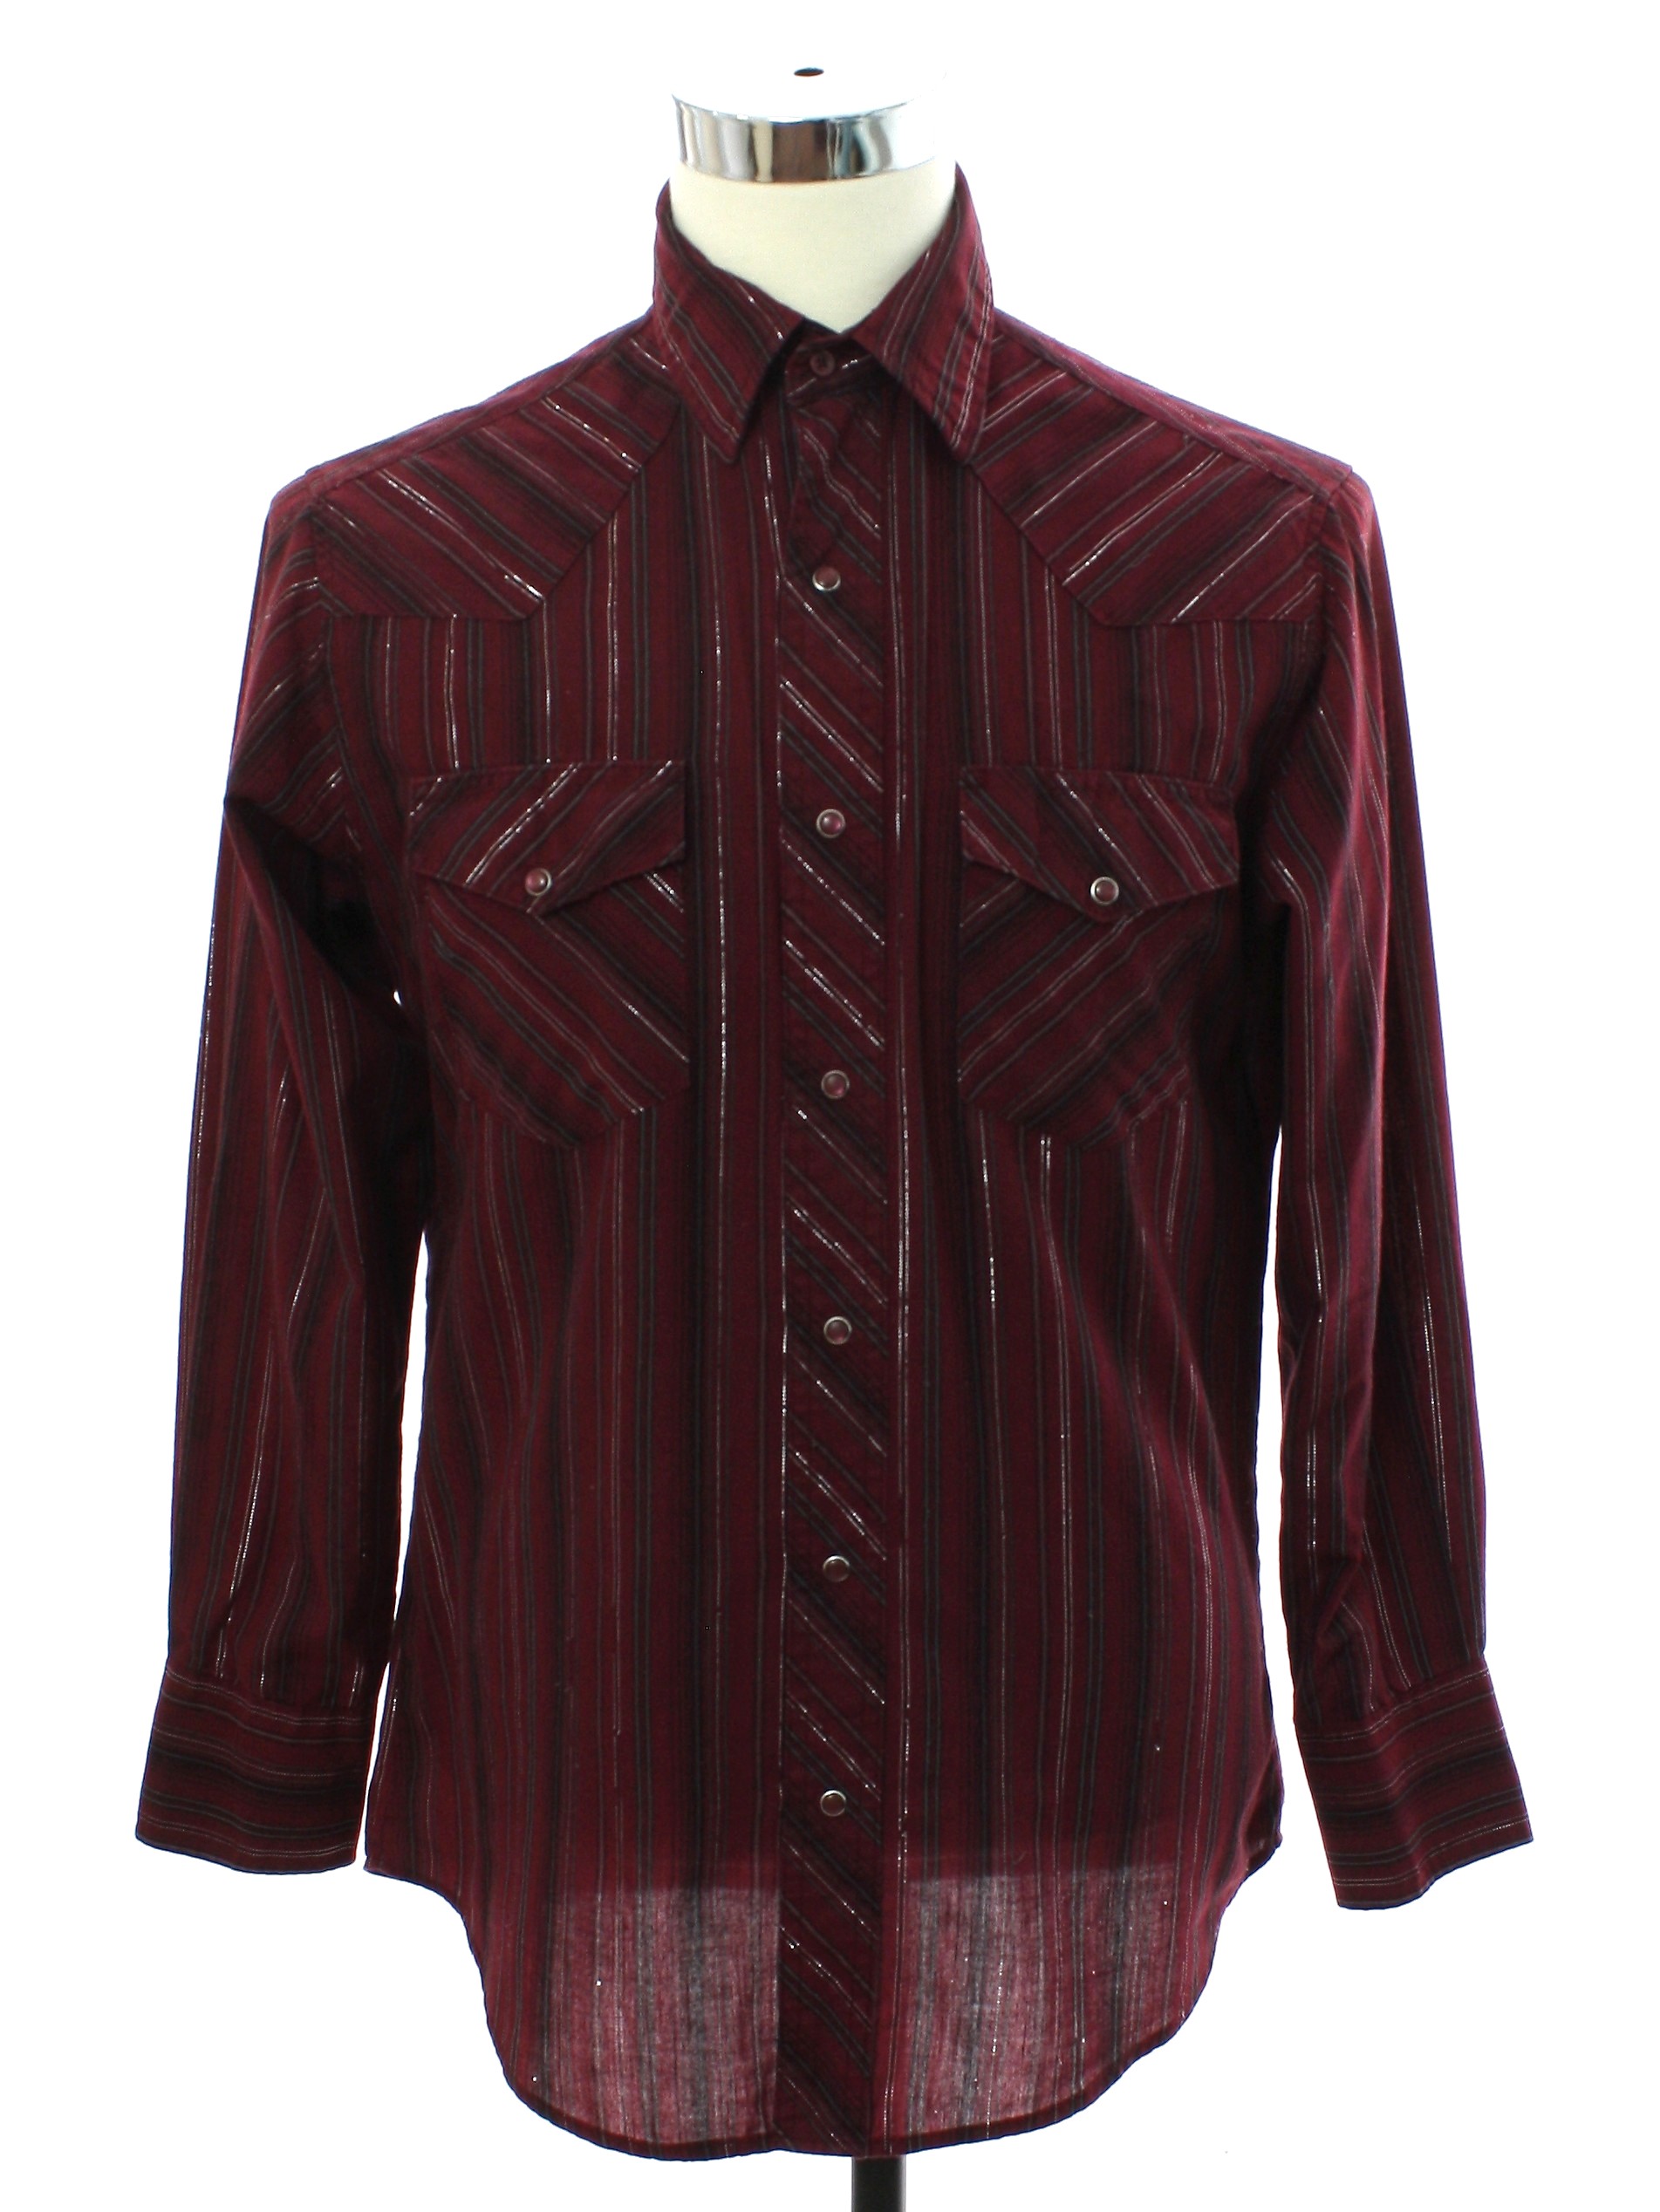 Western Shirt: 90s -Wrangler- Mens maroon background polyester cotton ...